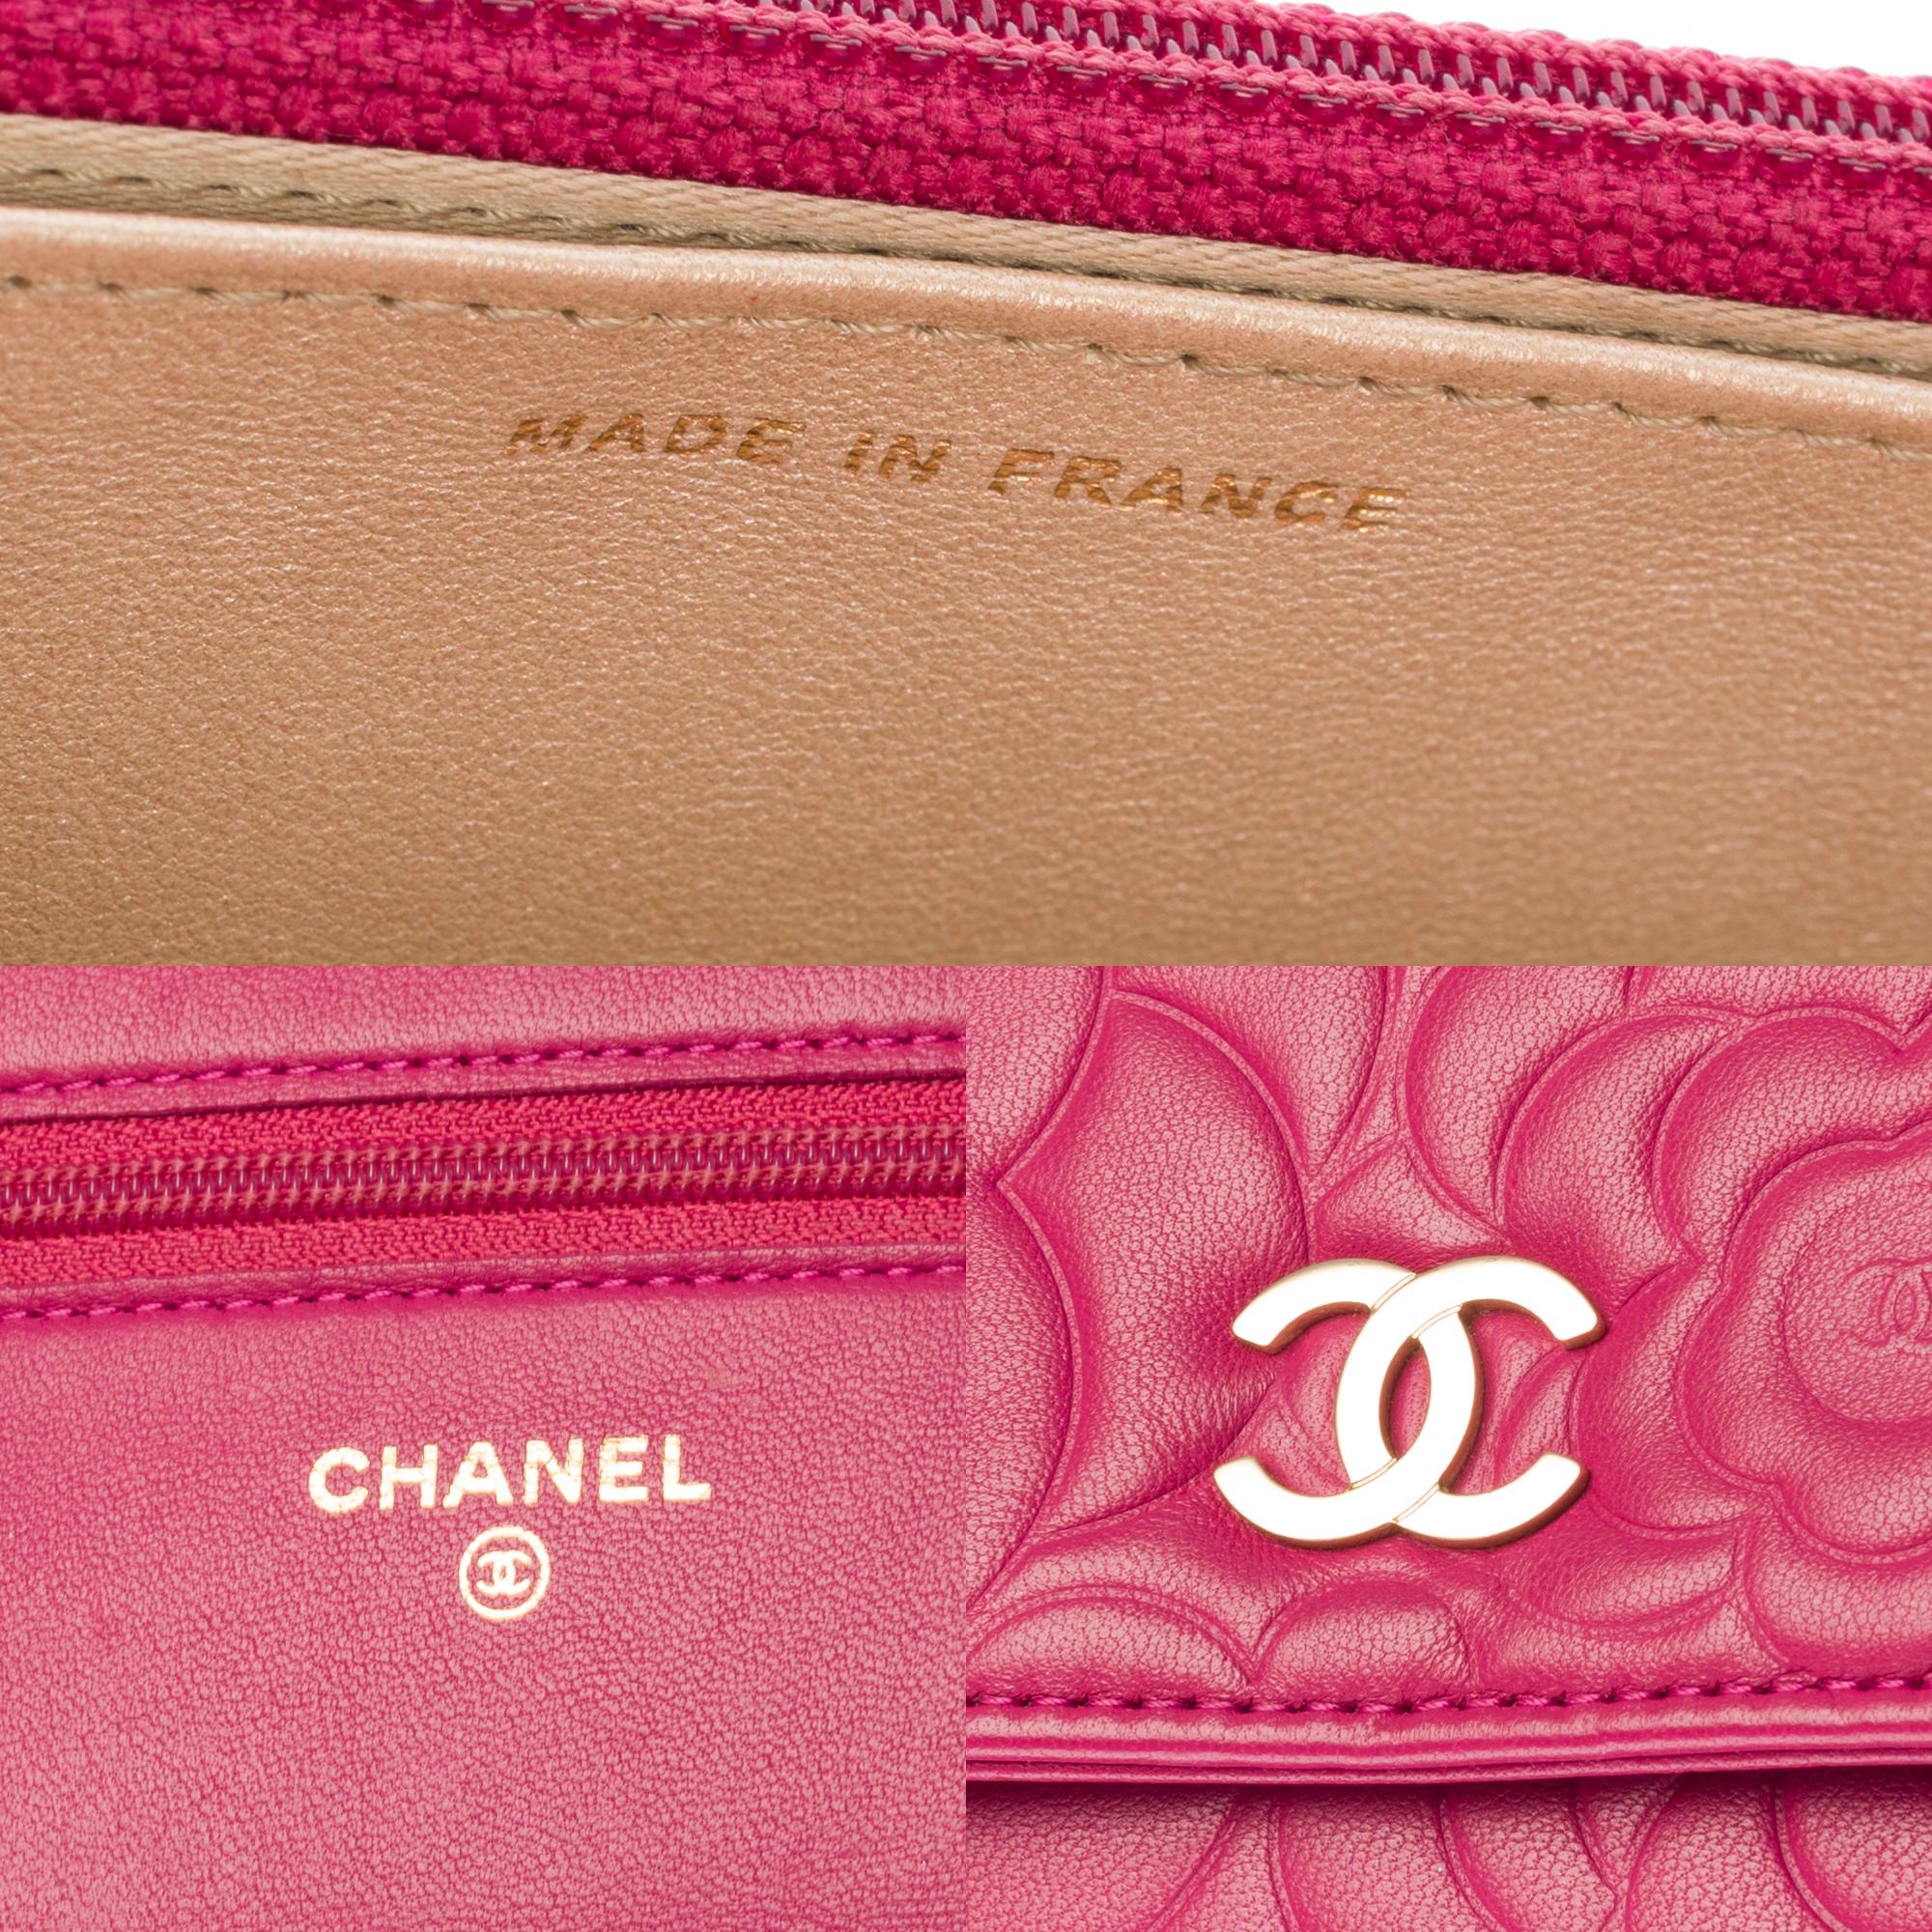 wallet on chain chanel pink